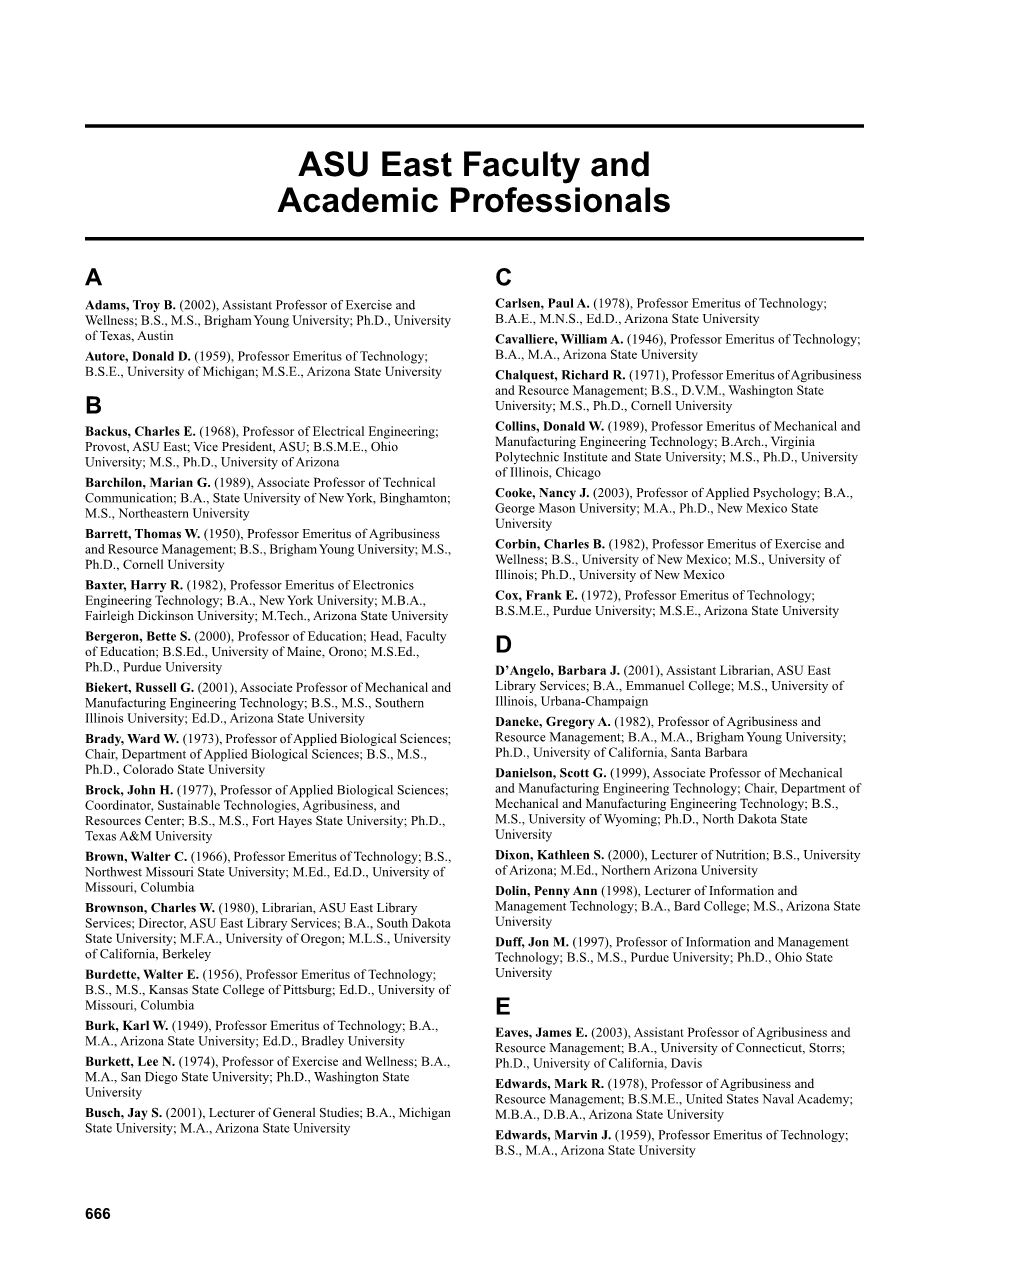 Asu East Faculty and Academic Professionals